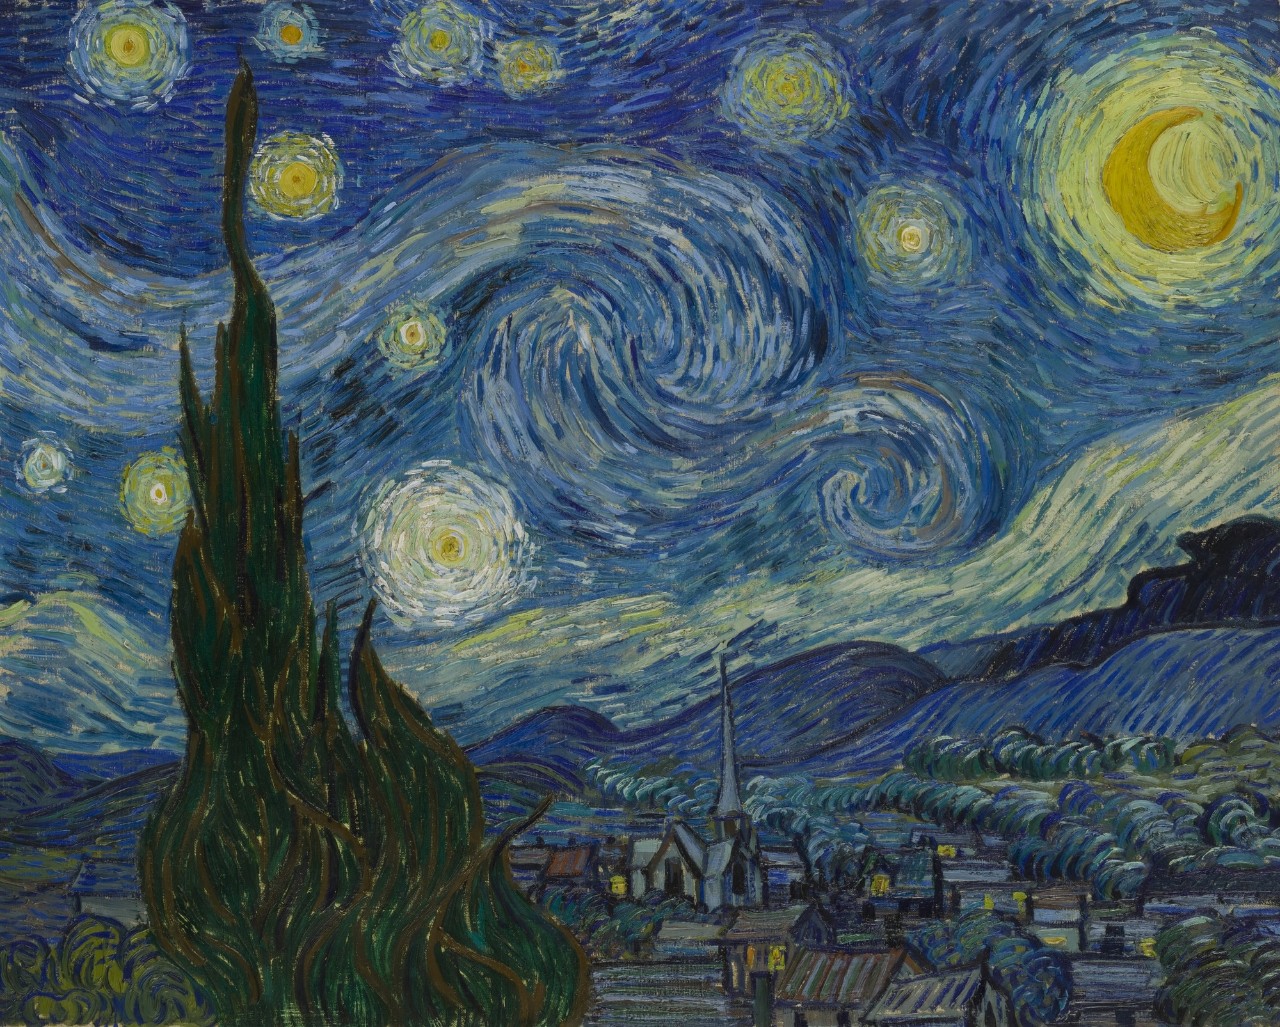 A painting by Vincent Van Gogh showing swirrly stars in a night sky over a peaceful village.